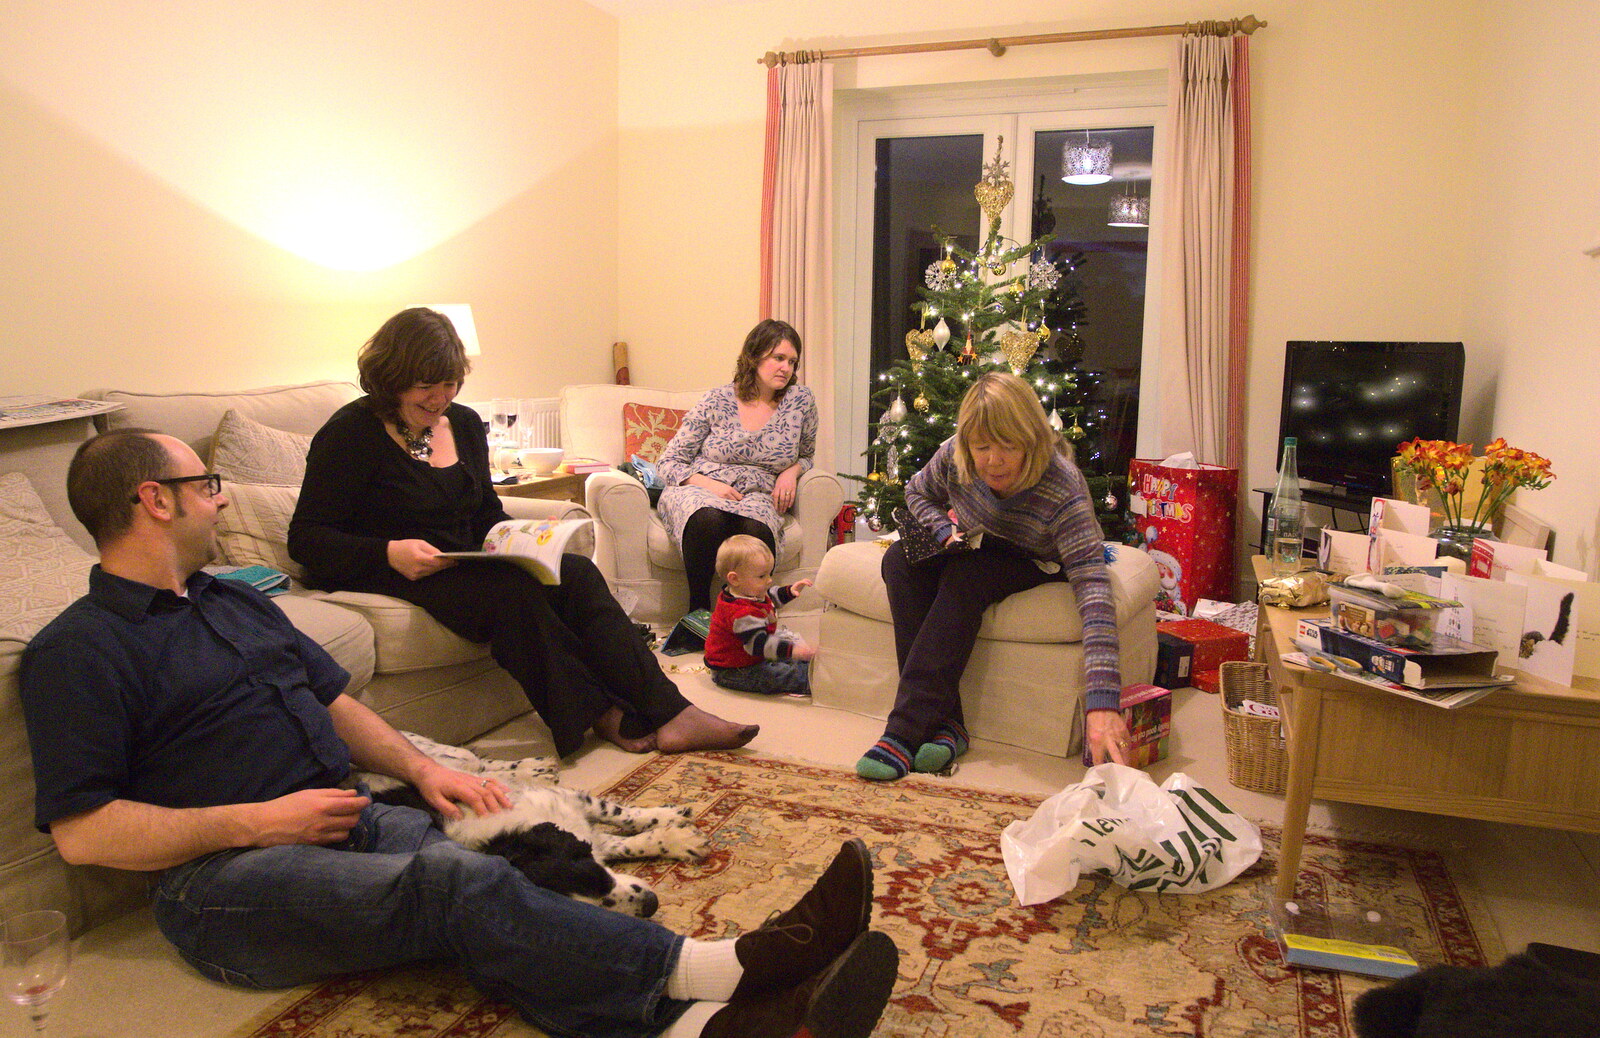 More present opening with Mother from Christmas Day in Spreyton, Devon - 25th December 2012